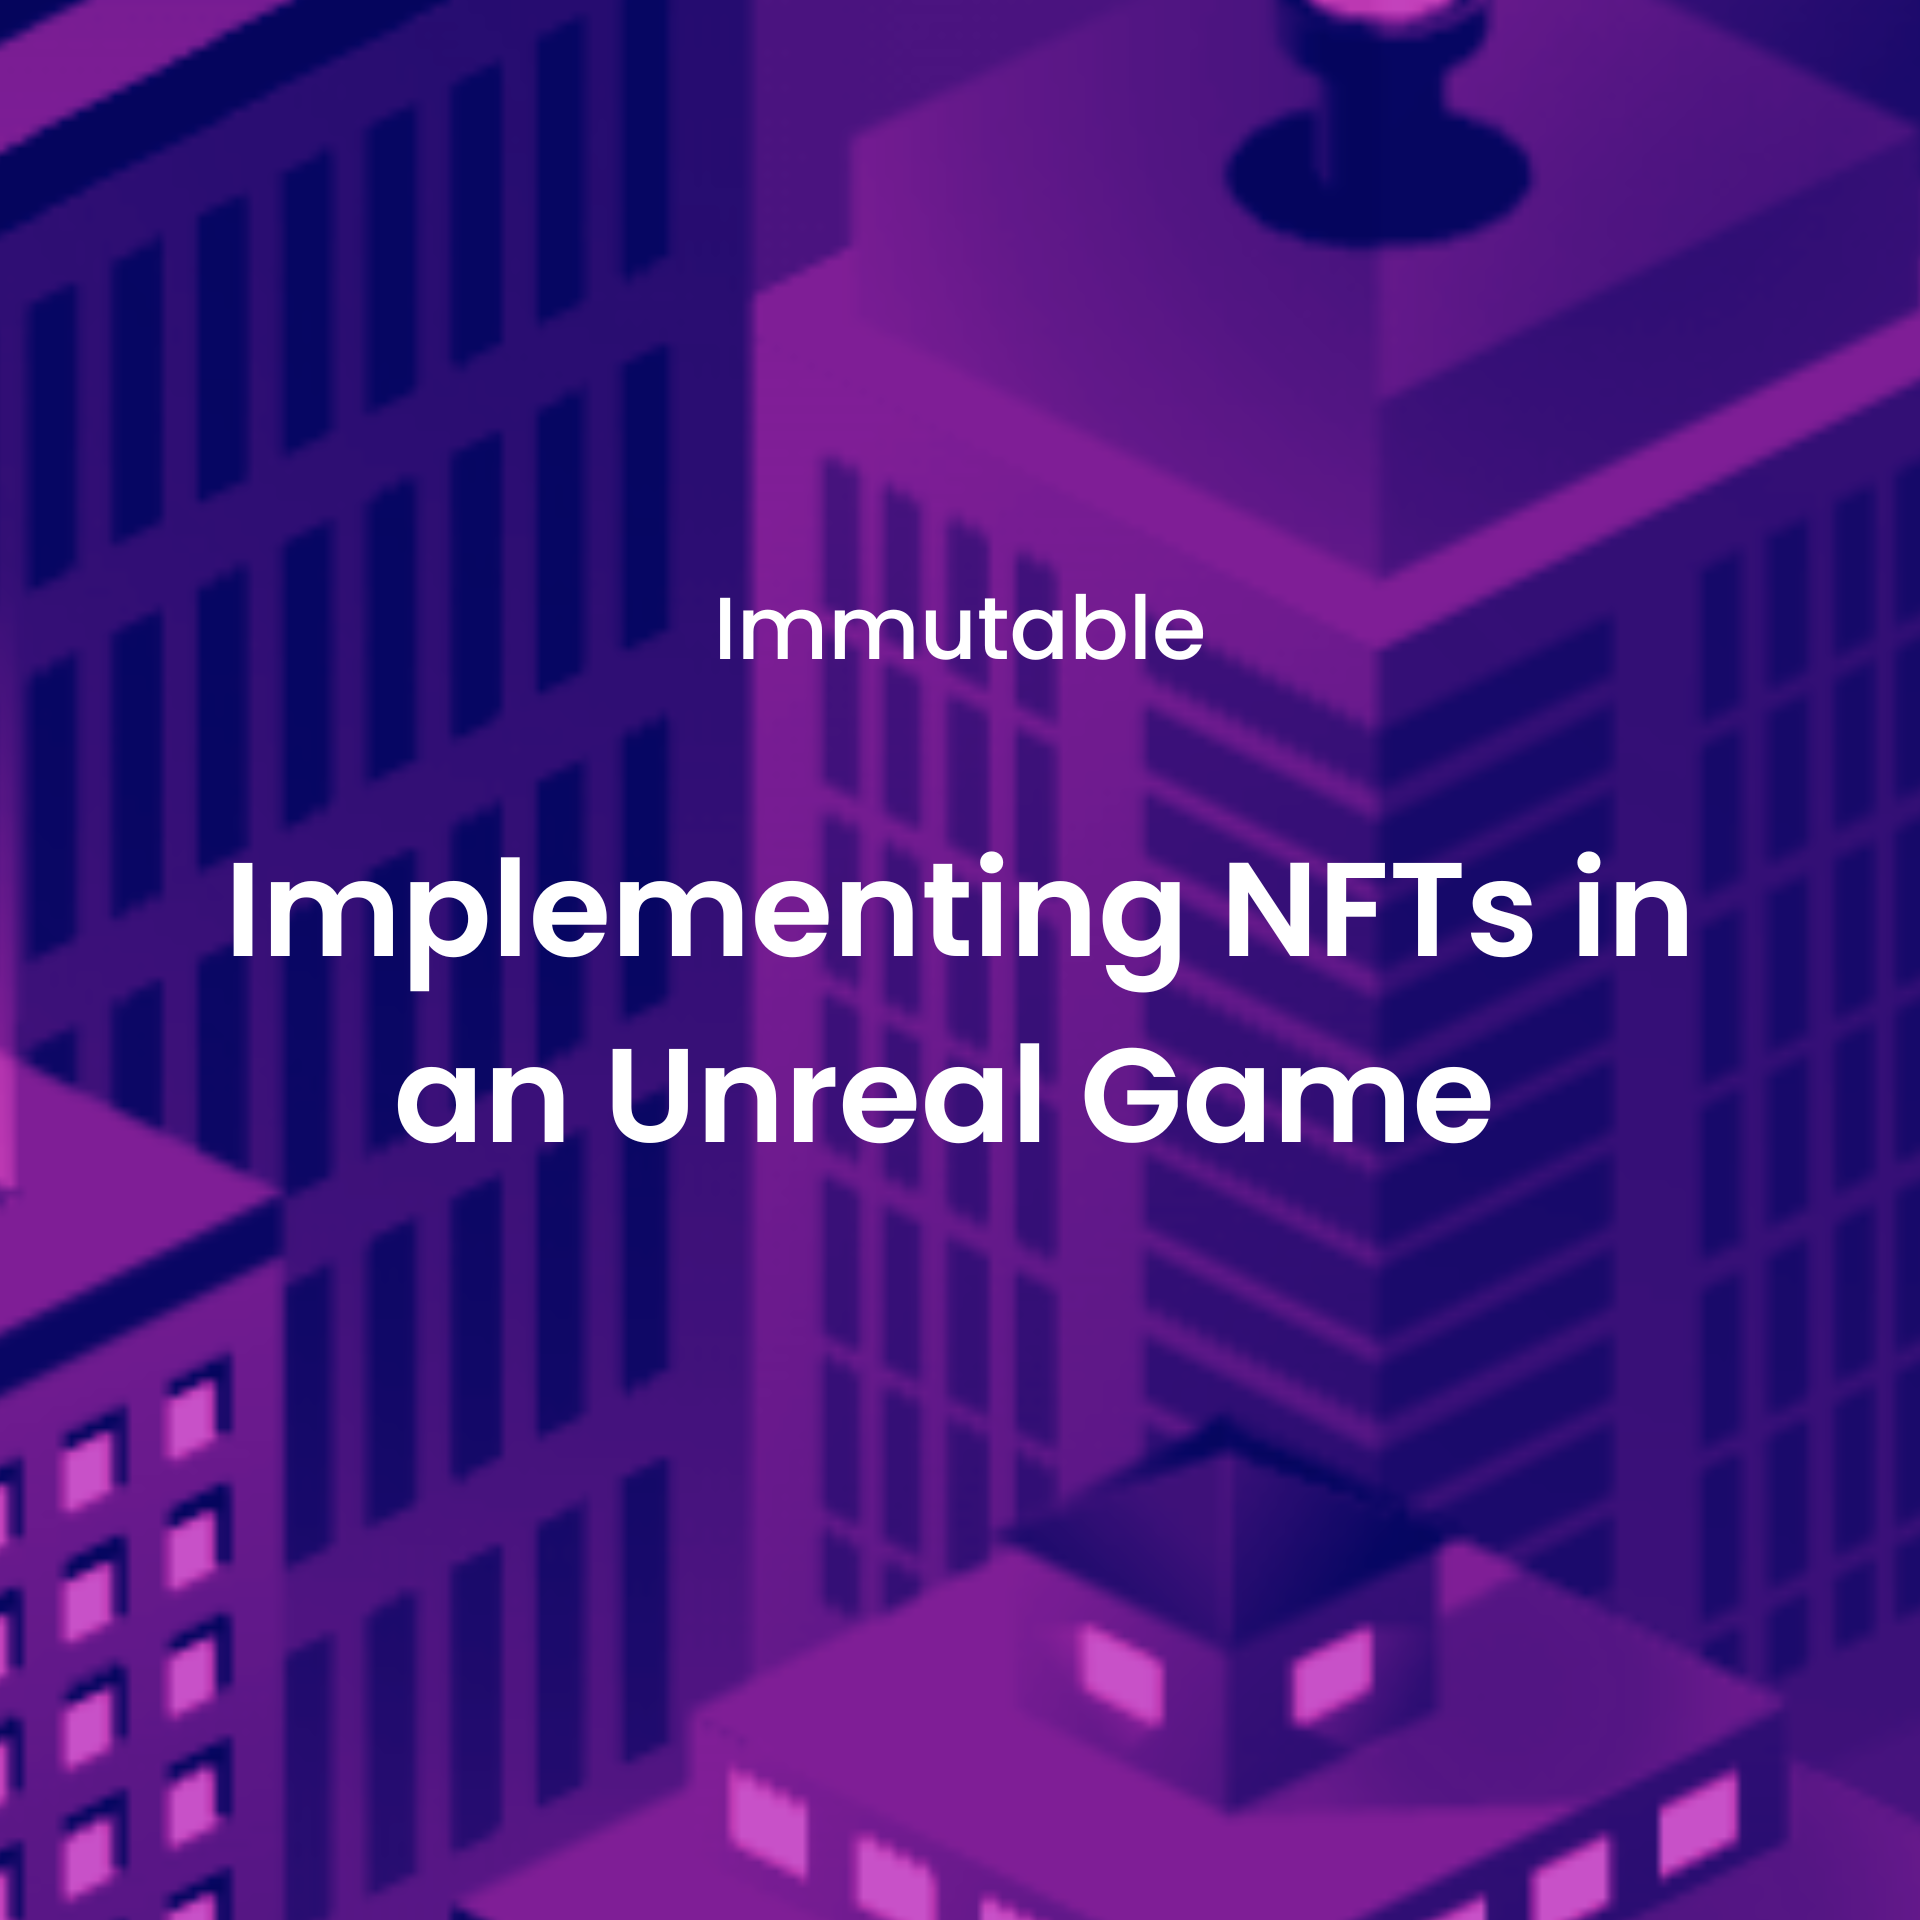 Integrate NFTs in Unreal Engine with the Immutable SDK